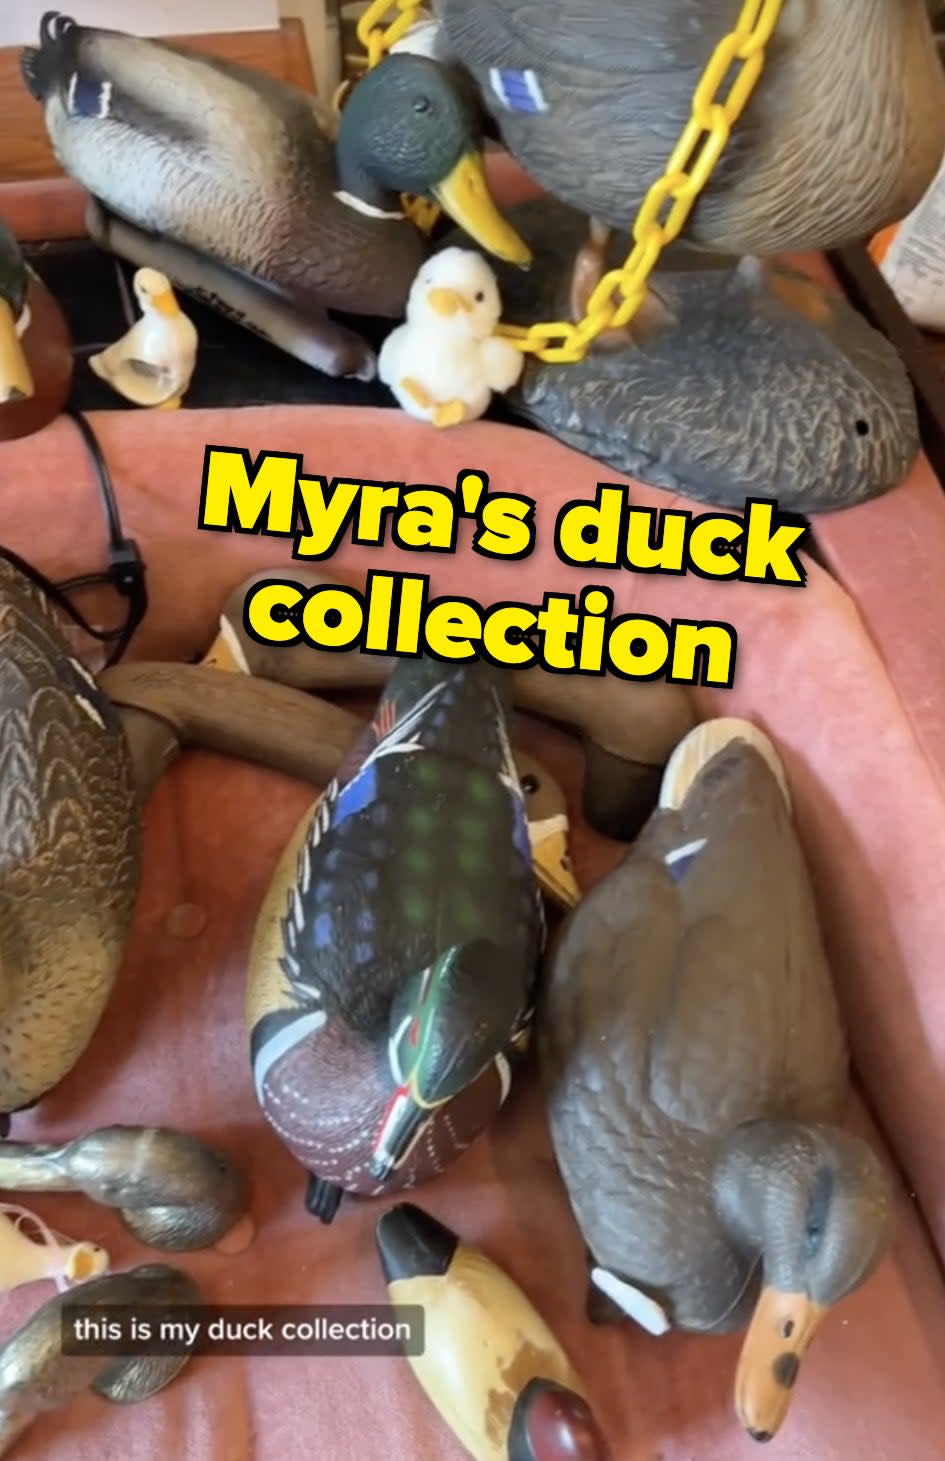 Myra's duck collection is being displayed